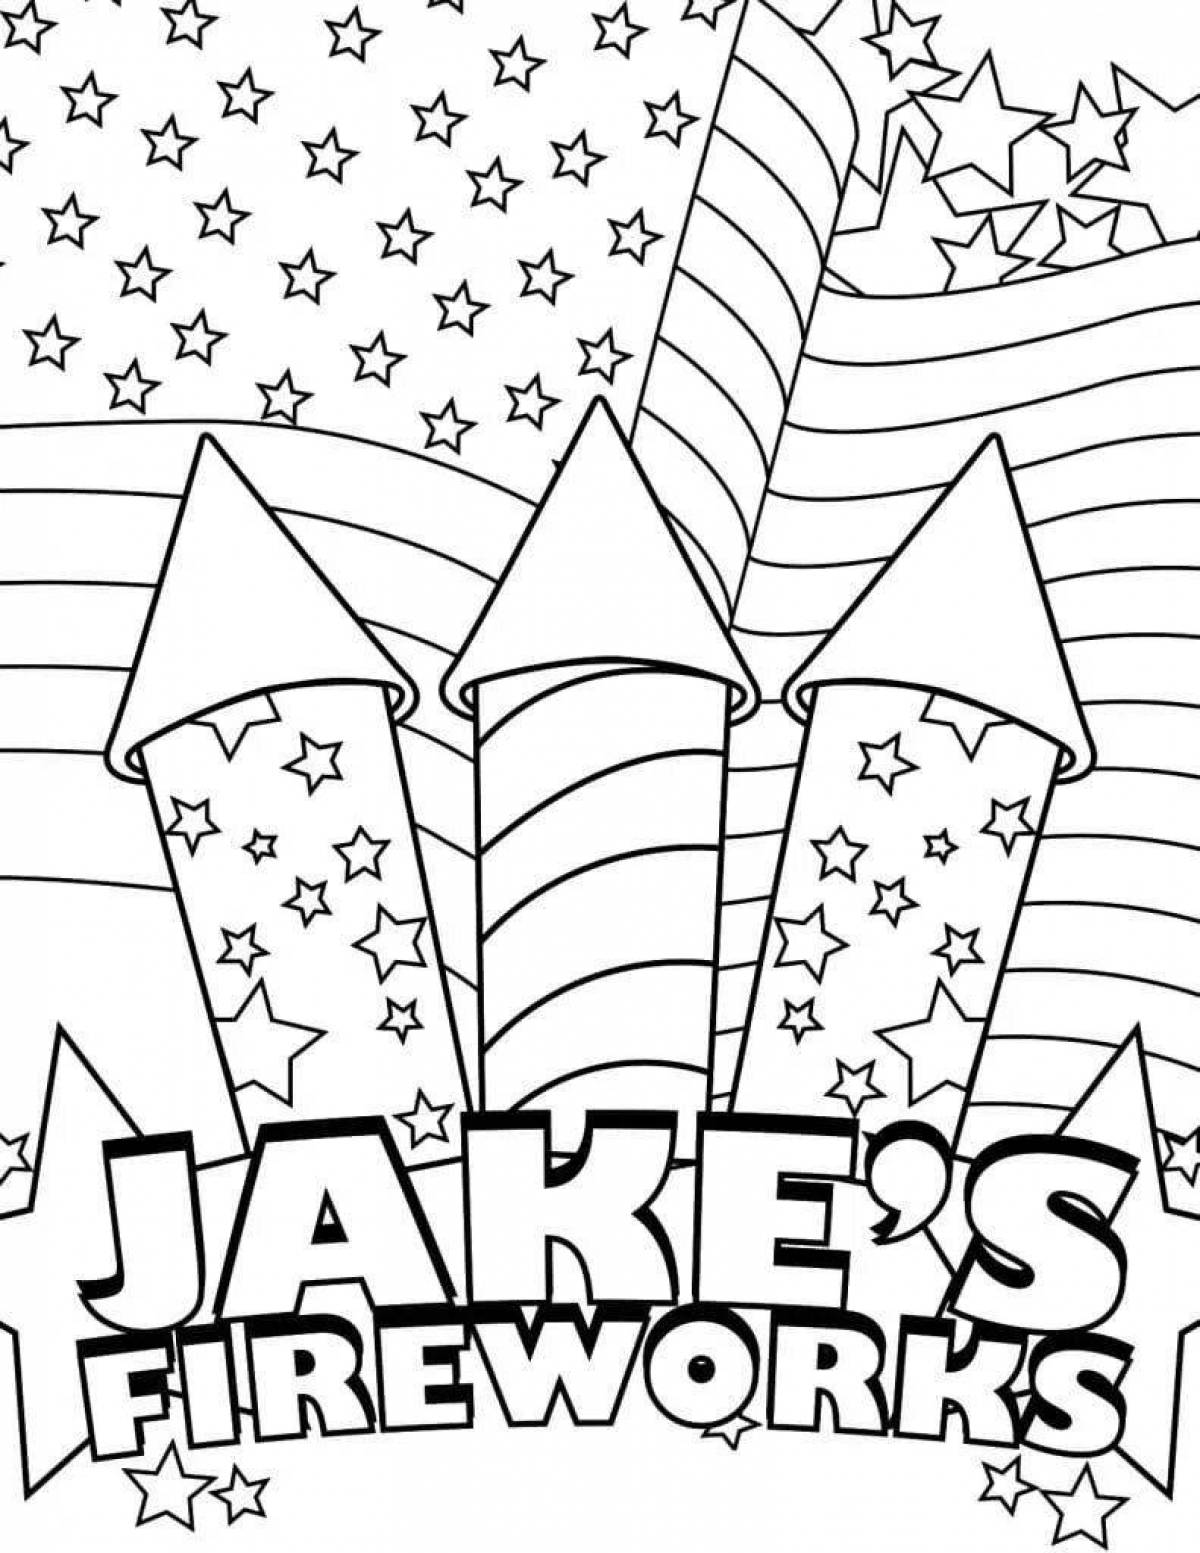 Adorable fireworks coloring book for kids